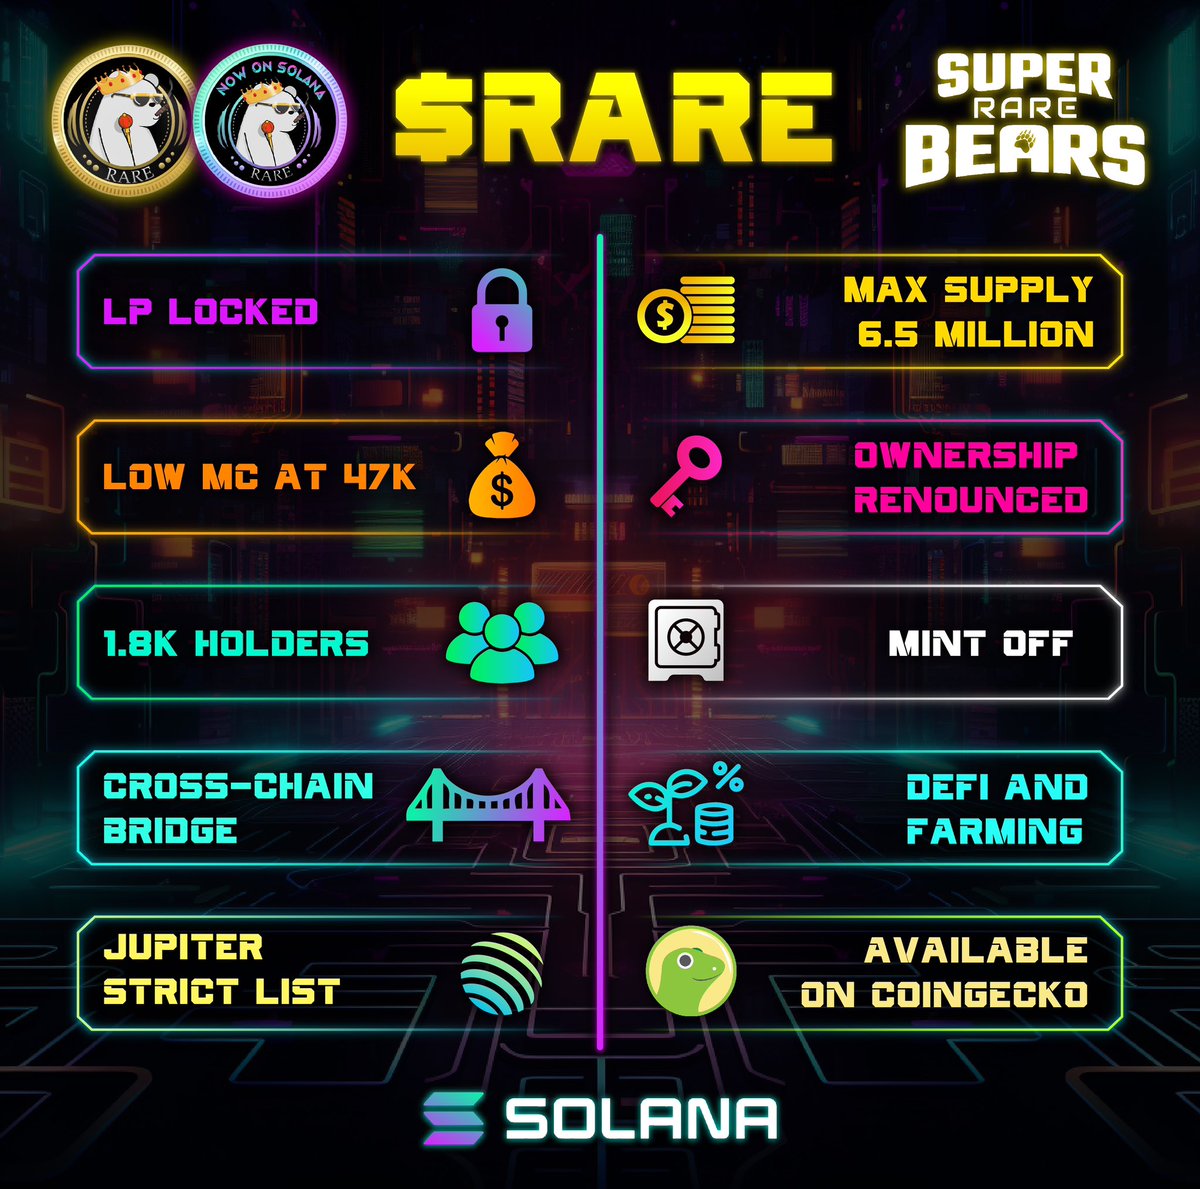 Calling all #solana degens. Have you checked out multichain token $RARE yet? 

#heywallet send 3 RARE to the first 100 retweets and comments

Limited supply 
Cross-chain Bridge 
Low MC
Mint off
On @Jupiterexchange Strict list

$RARE Contract Address…